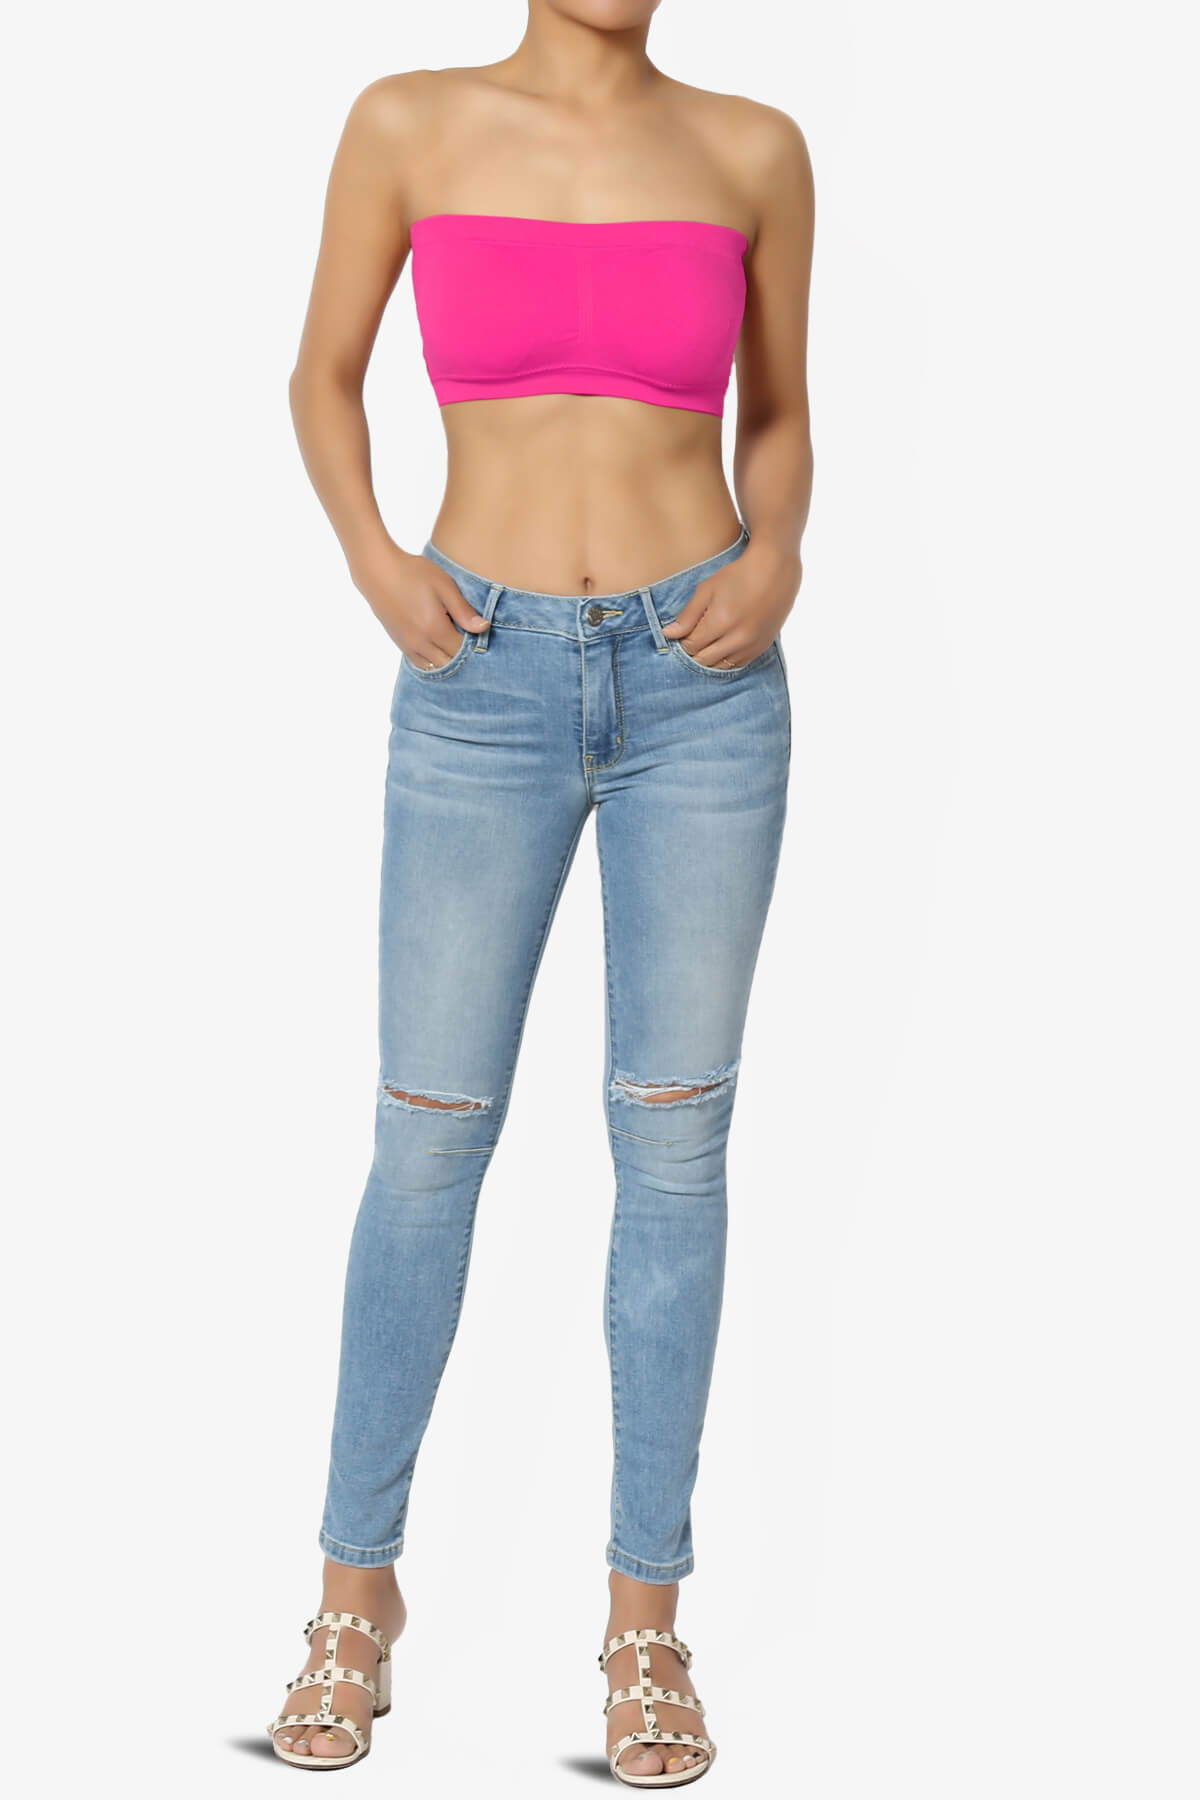 Candid Removable Pad Bandeau Bra Top NEON PINK_6